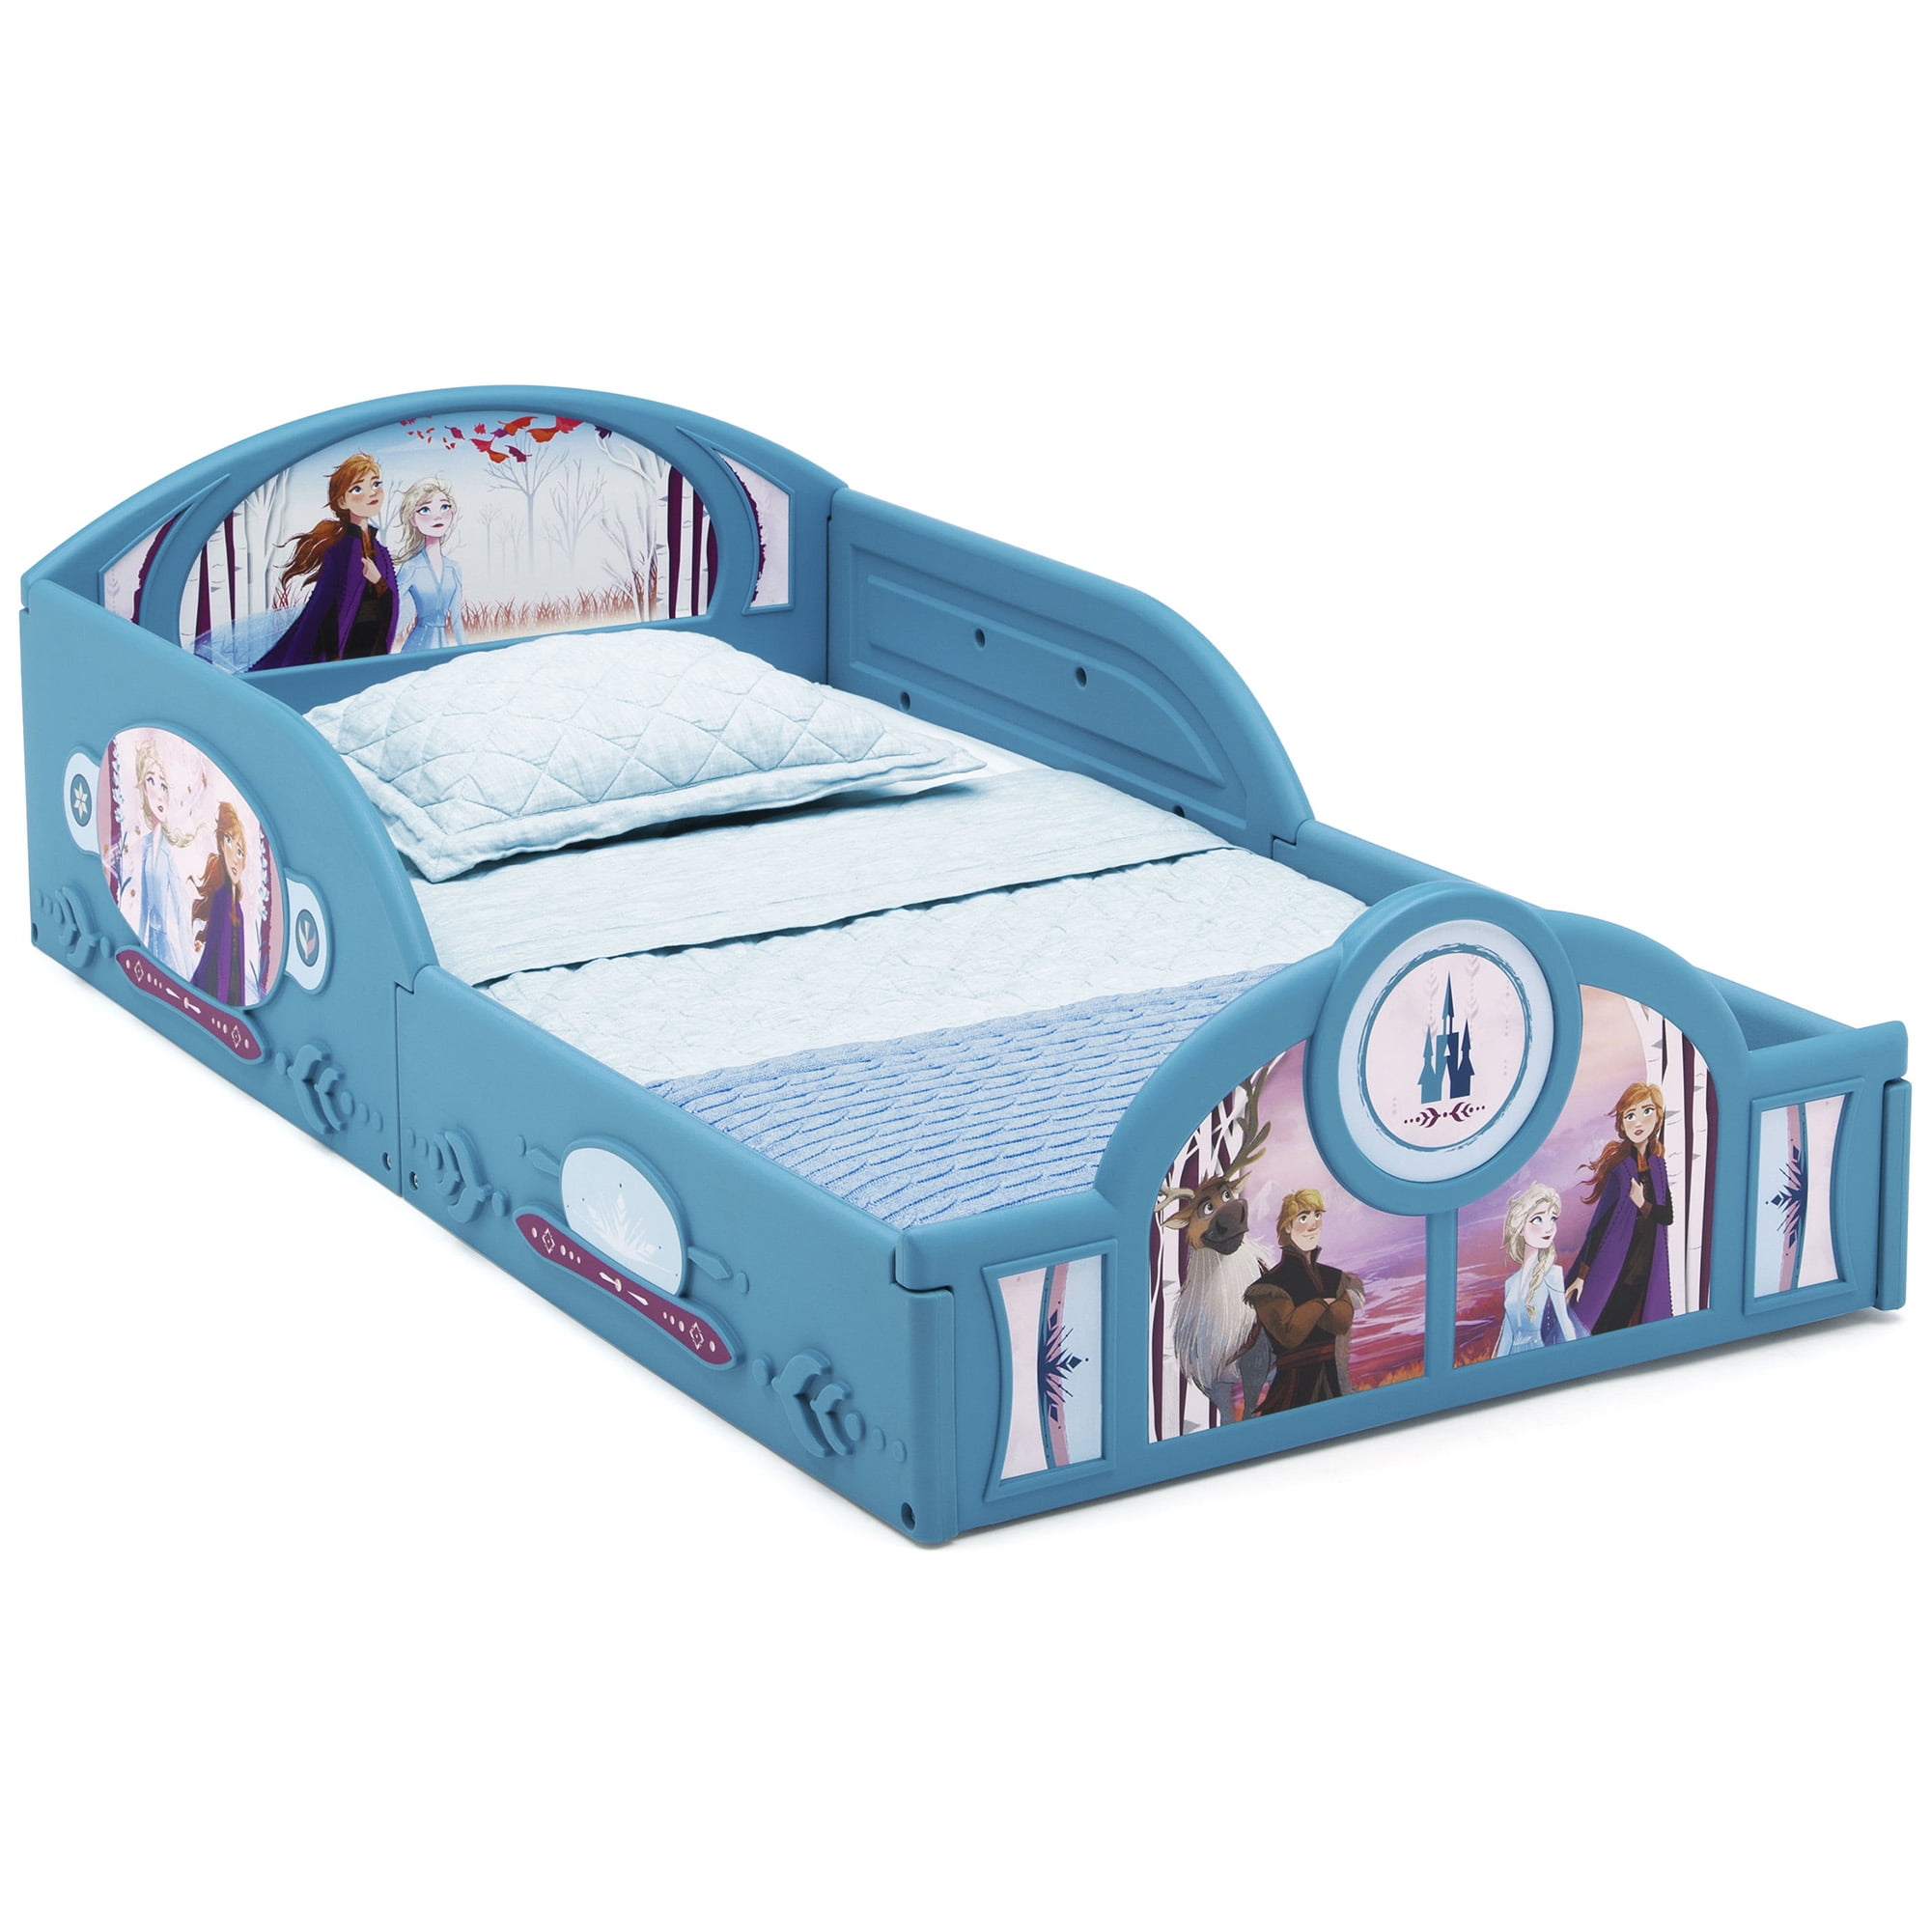 Details about   Peppa Pig Plastic Sleep and Play Toddler Bed by Delta Children 